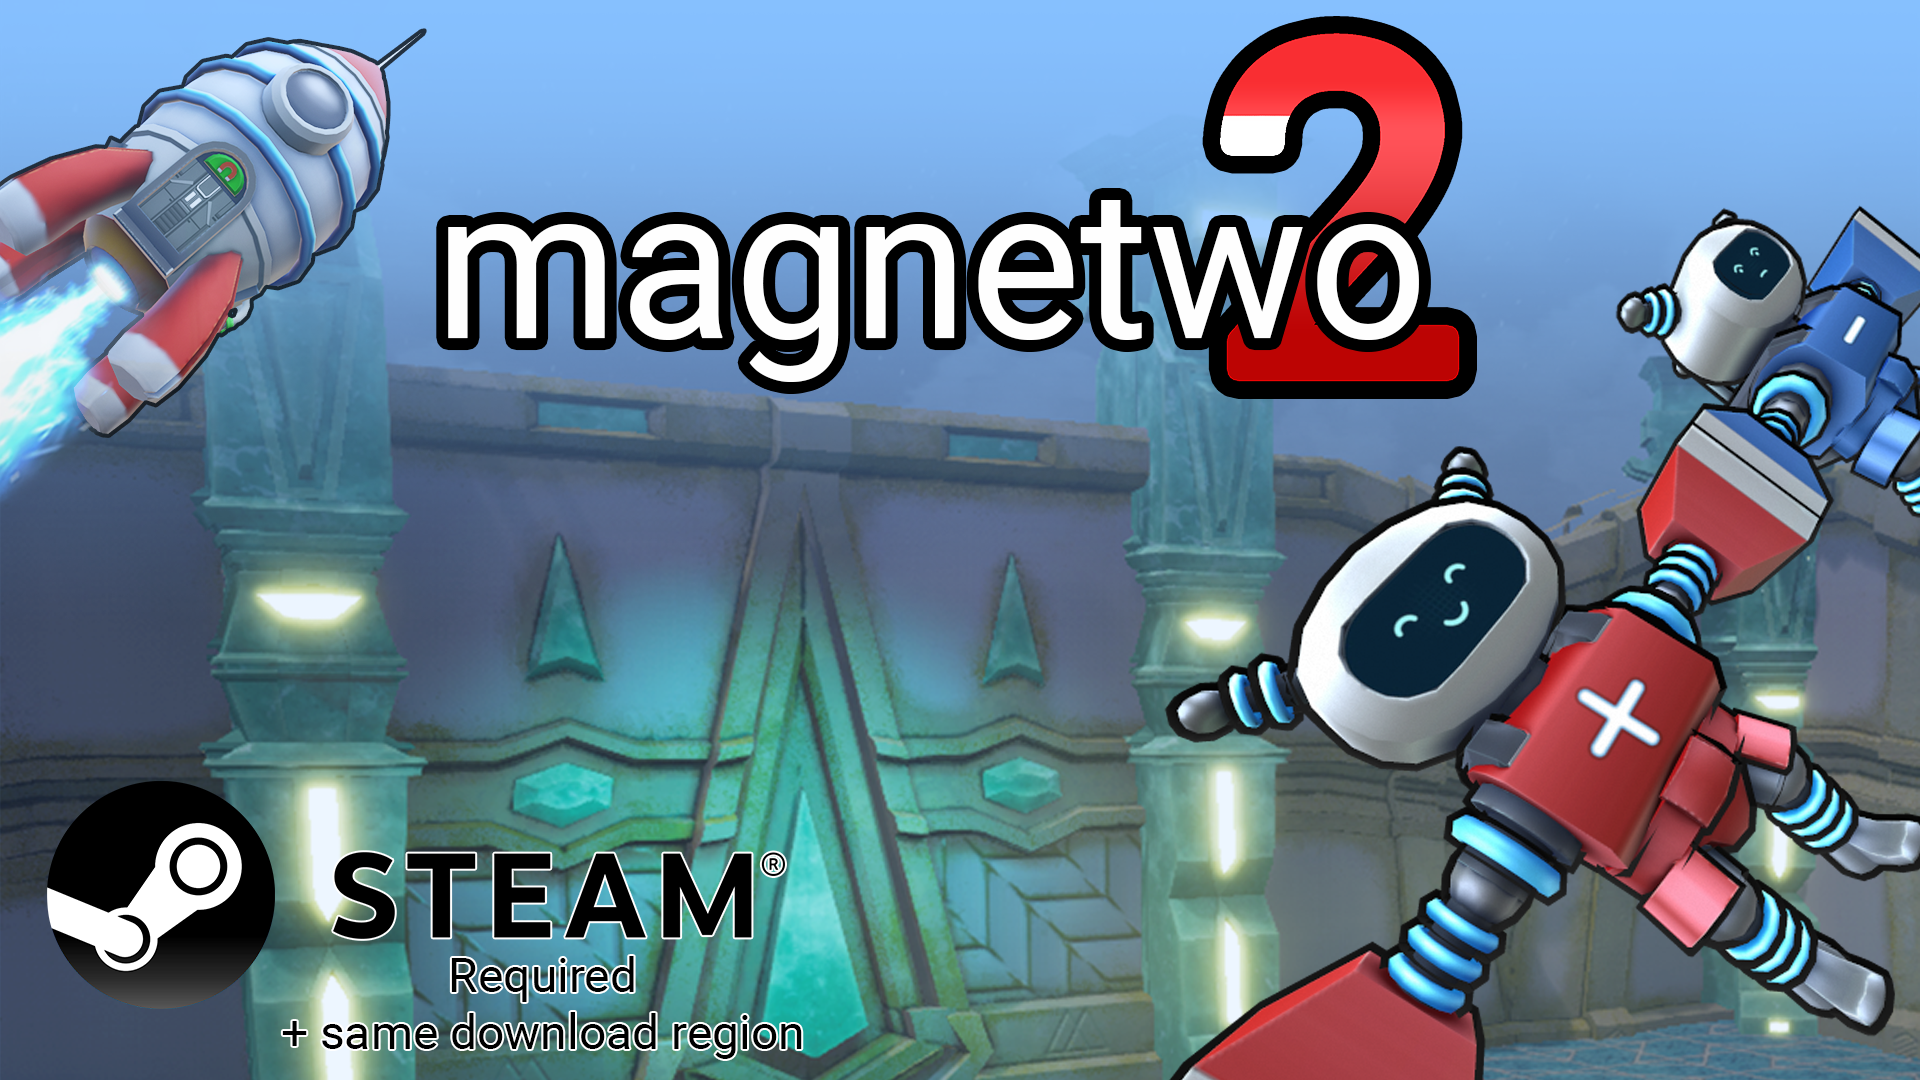 Magnetwo